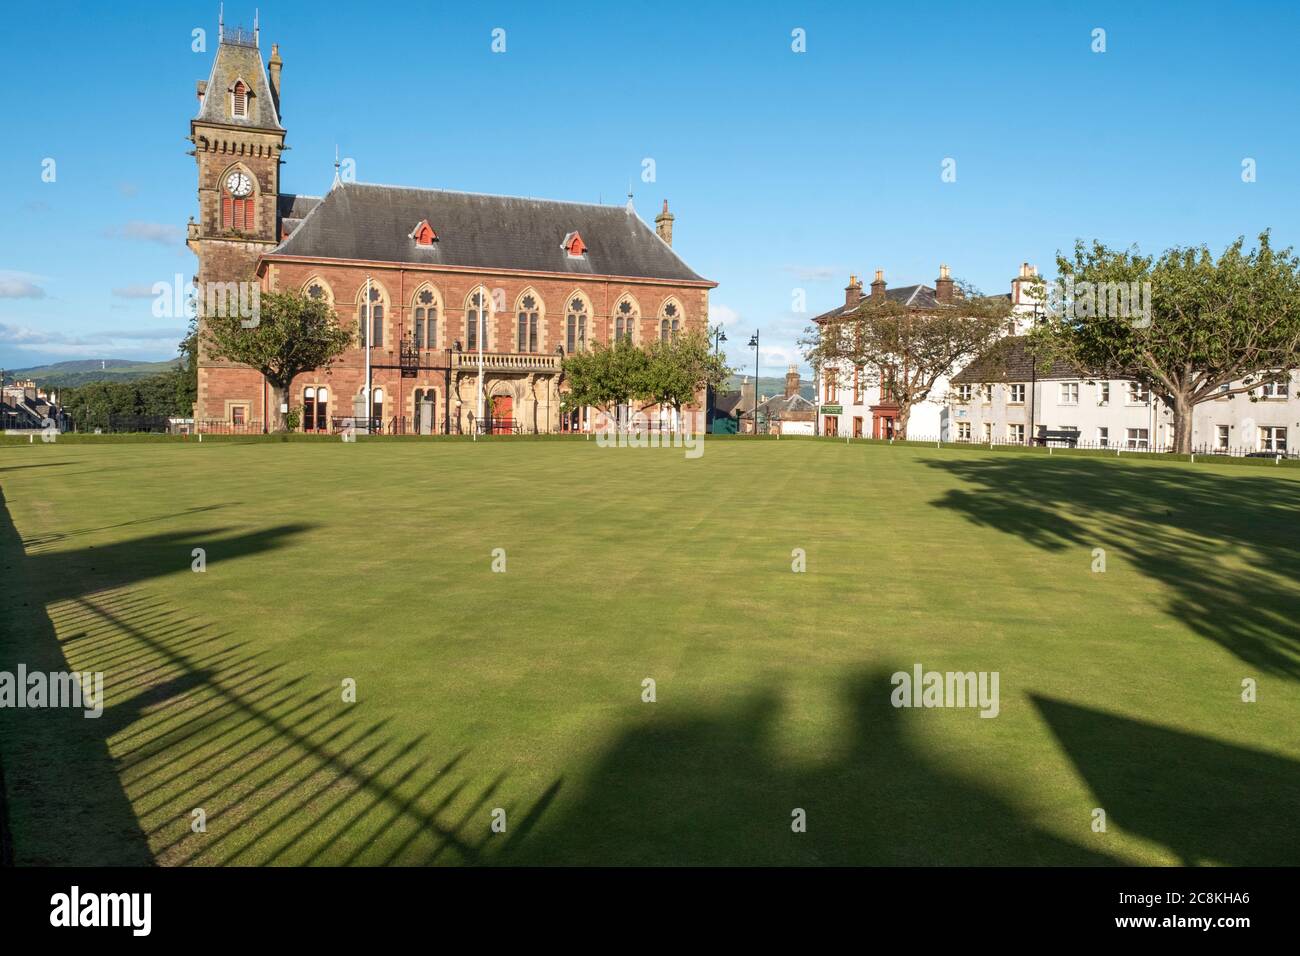 Wigtown public bowling green and town hall, Wigtown, Dumfries & Galloway, Scotland. Stock Photo